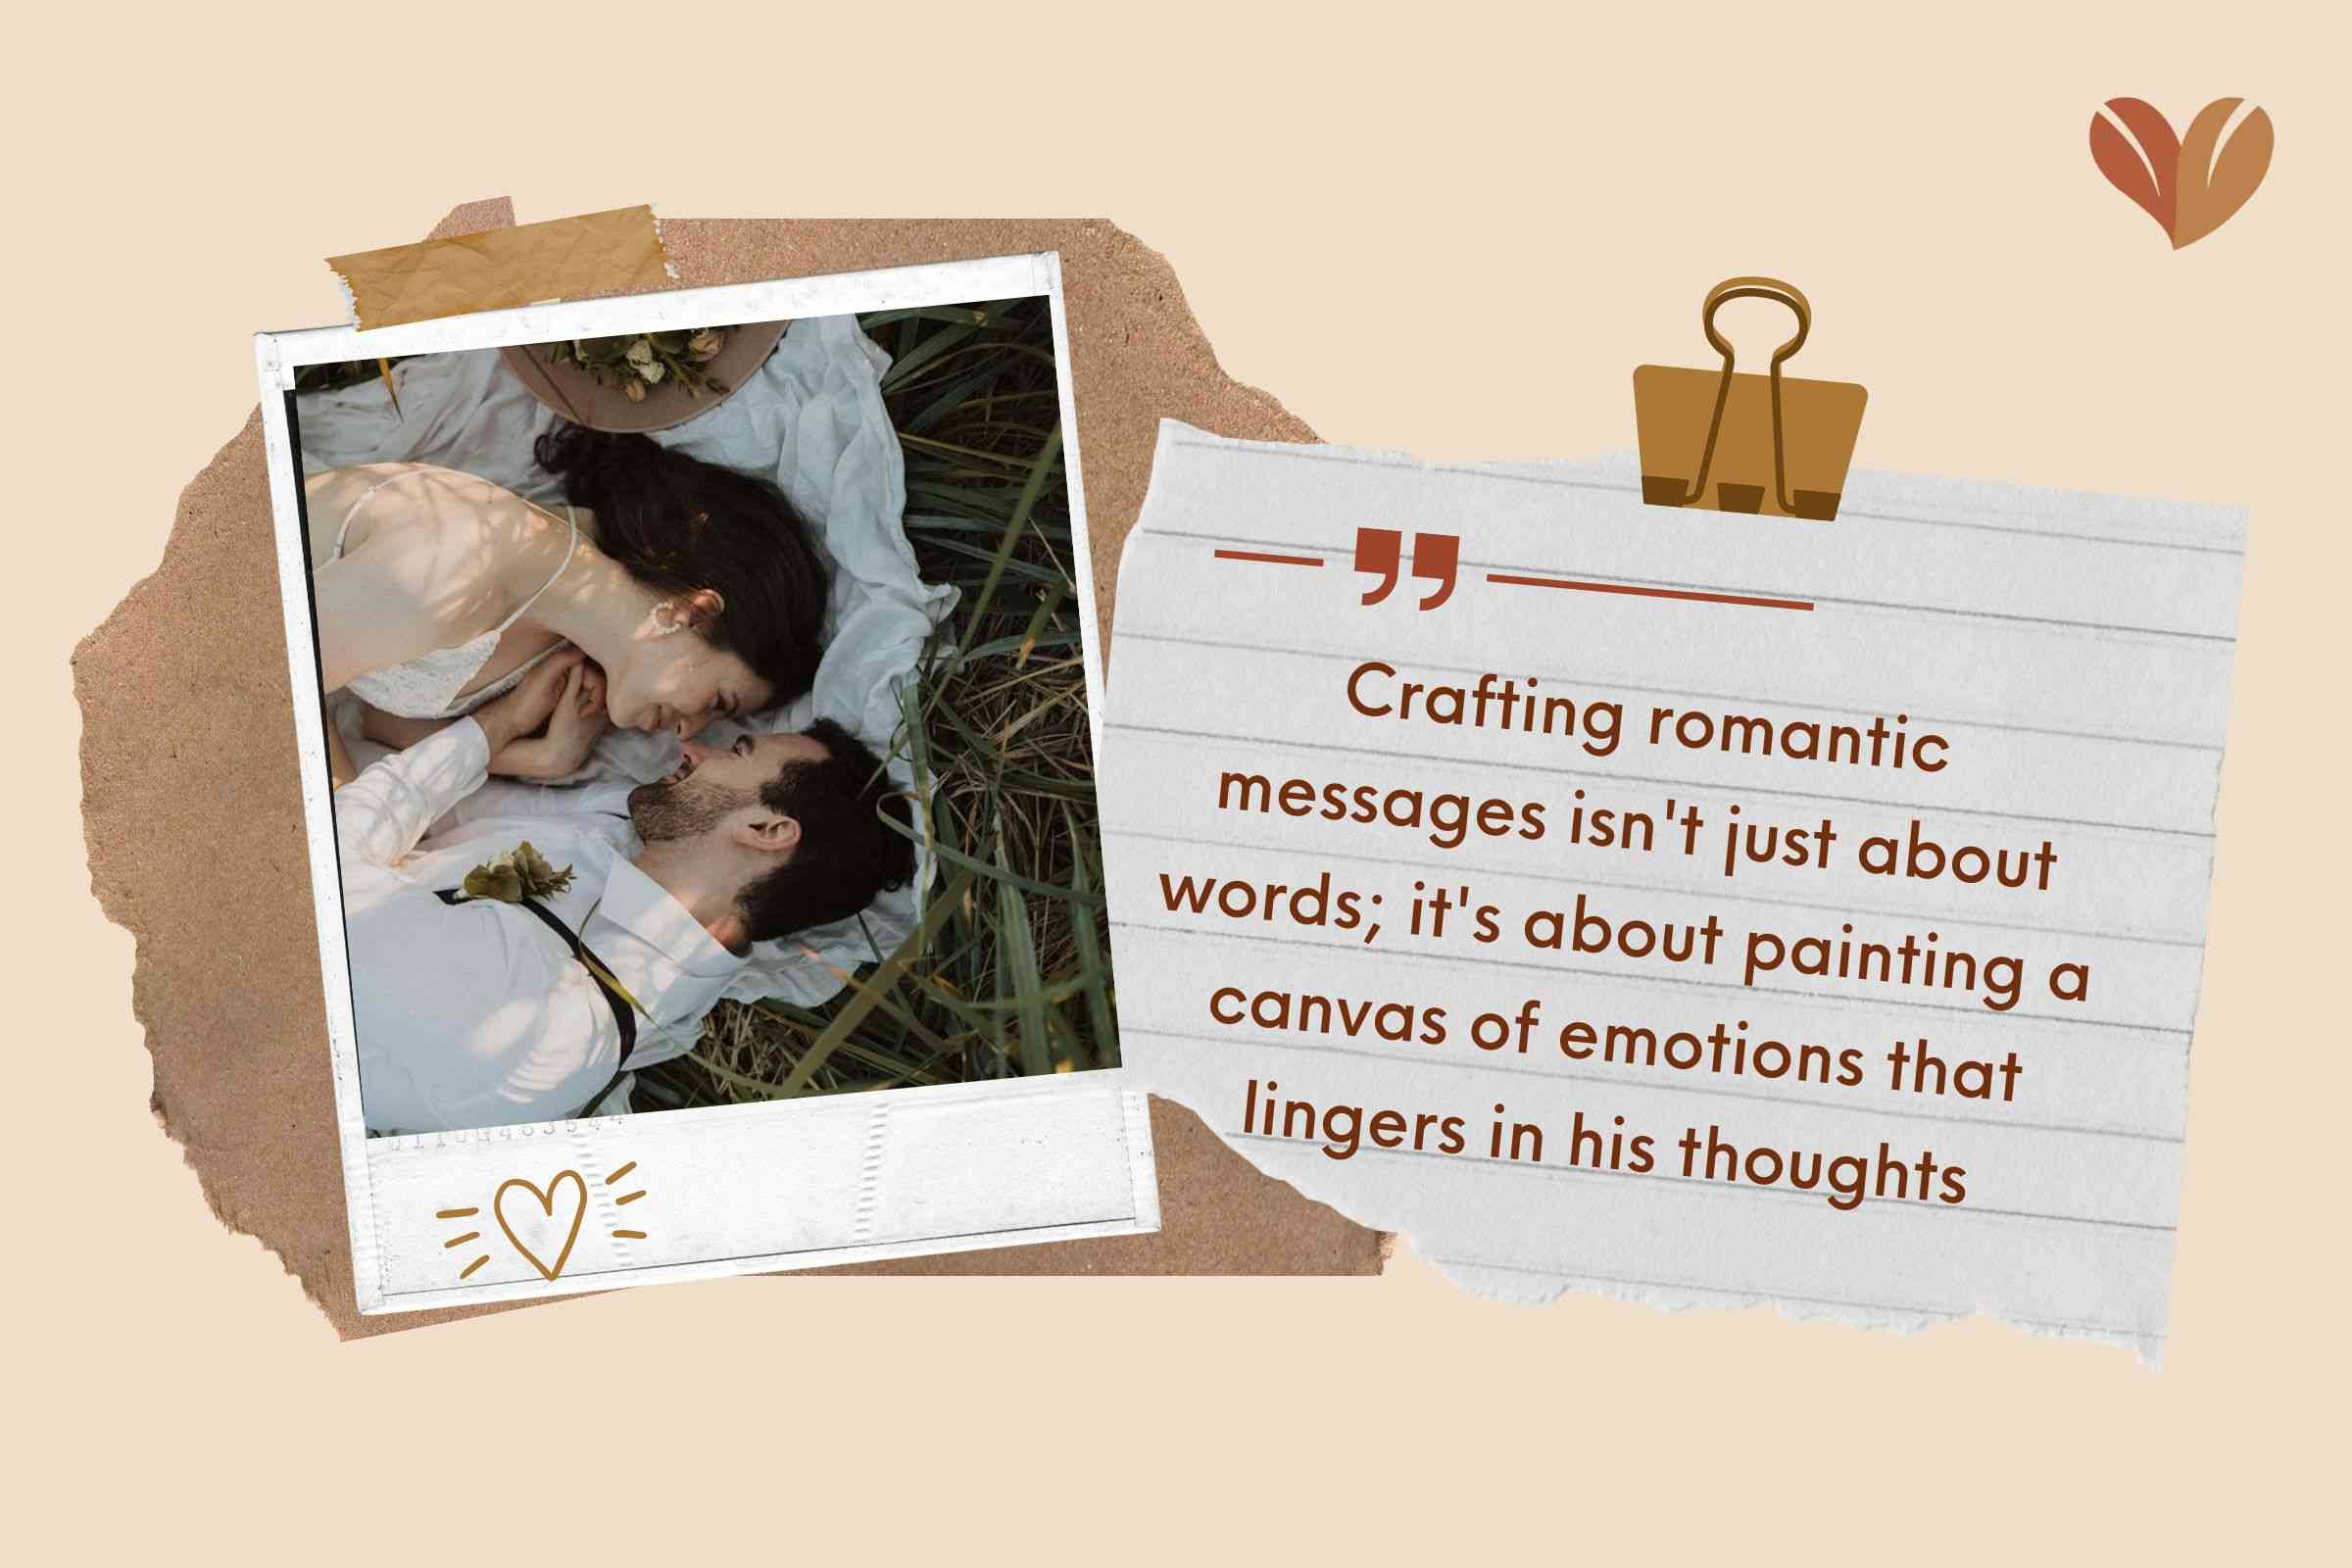 Crafting romantic messages isn't just about words; it's about painting a canvas of emotions that lingers in his thoughts